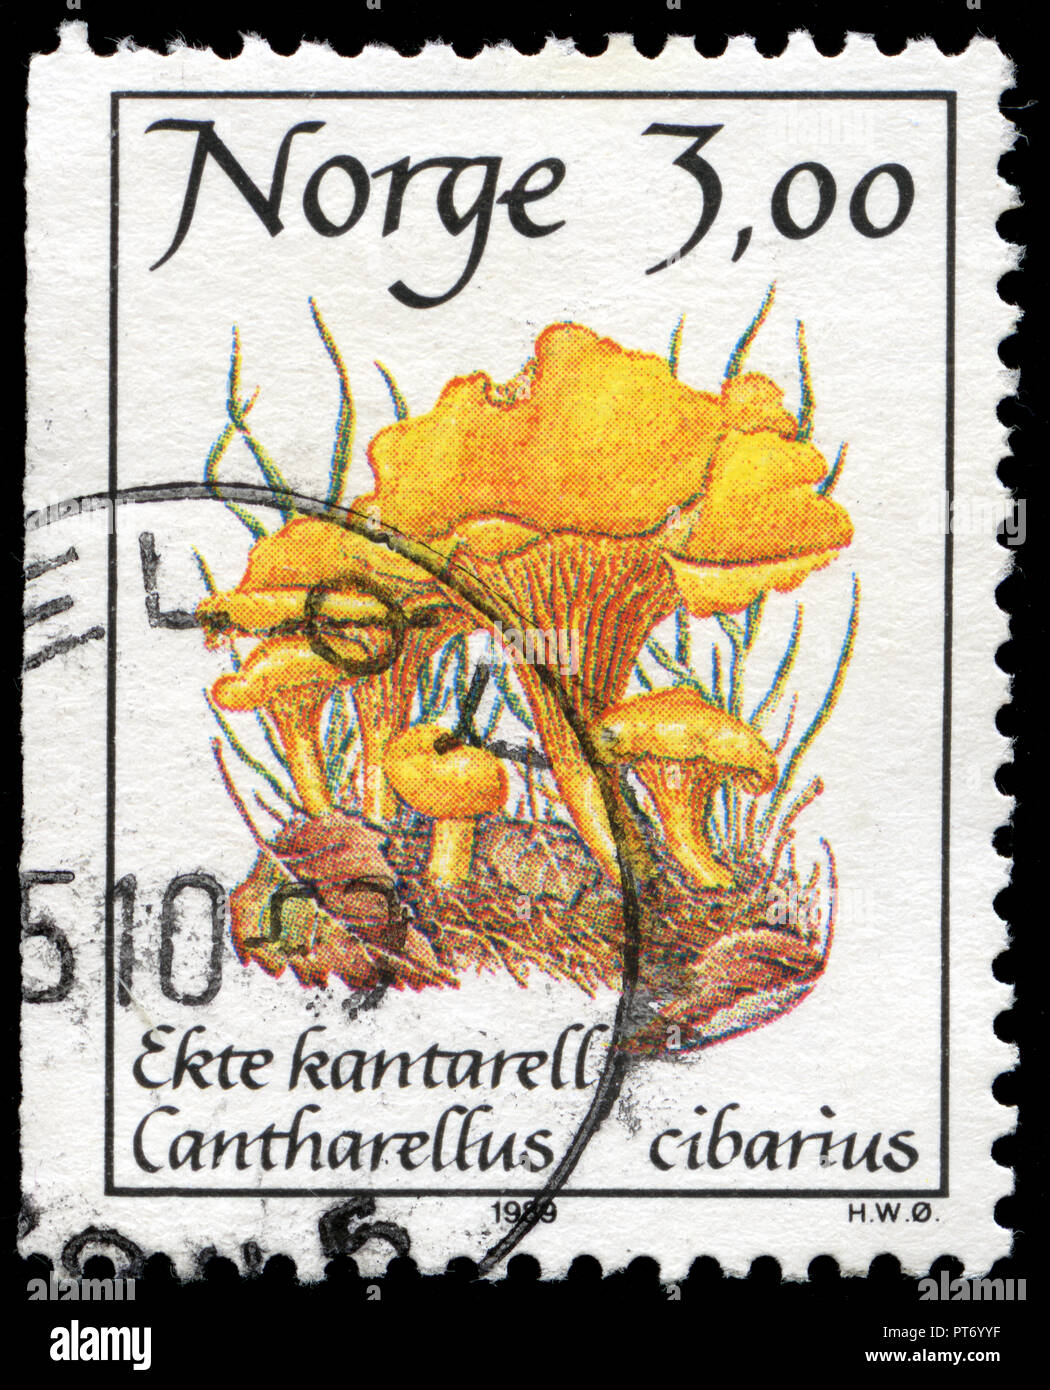 Postmarked stamp from Norway in the Mushrooms series issued in 1989 Stock Photo